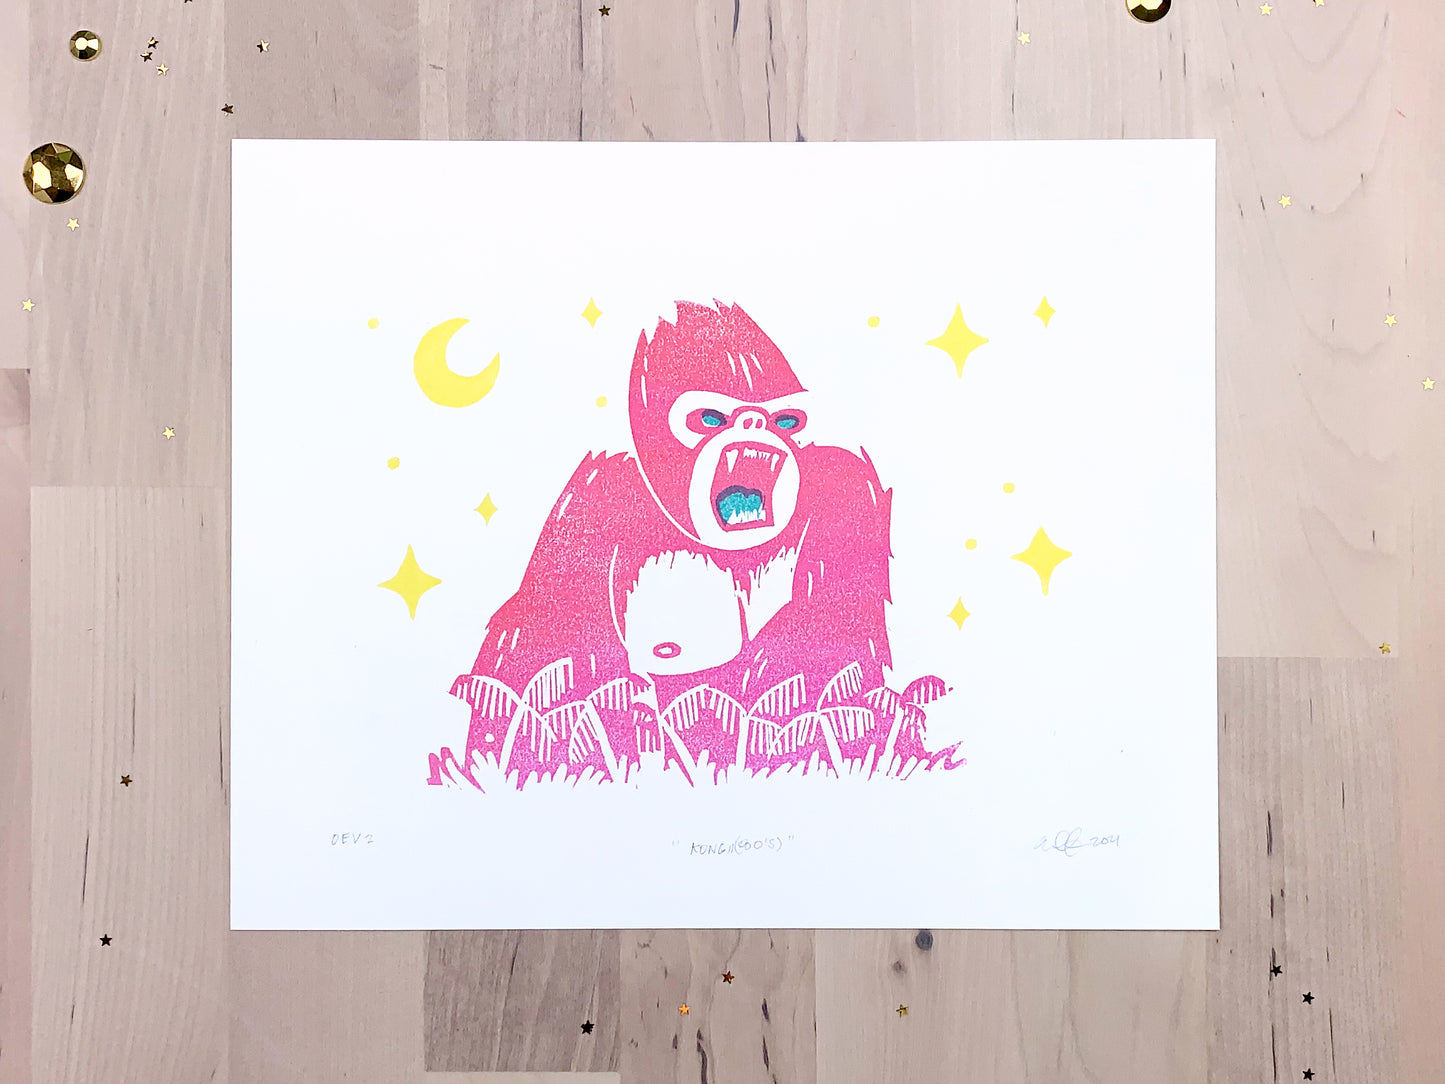 Original art print by Amber Orenstein. Relief print of a pink King Kong roaring on his jungle island home.